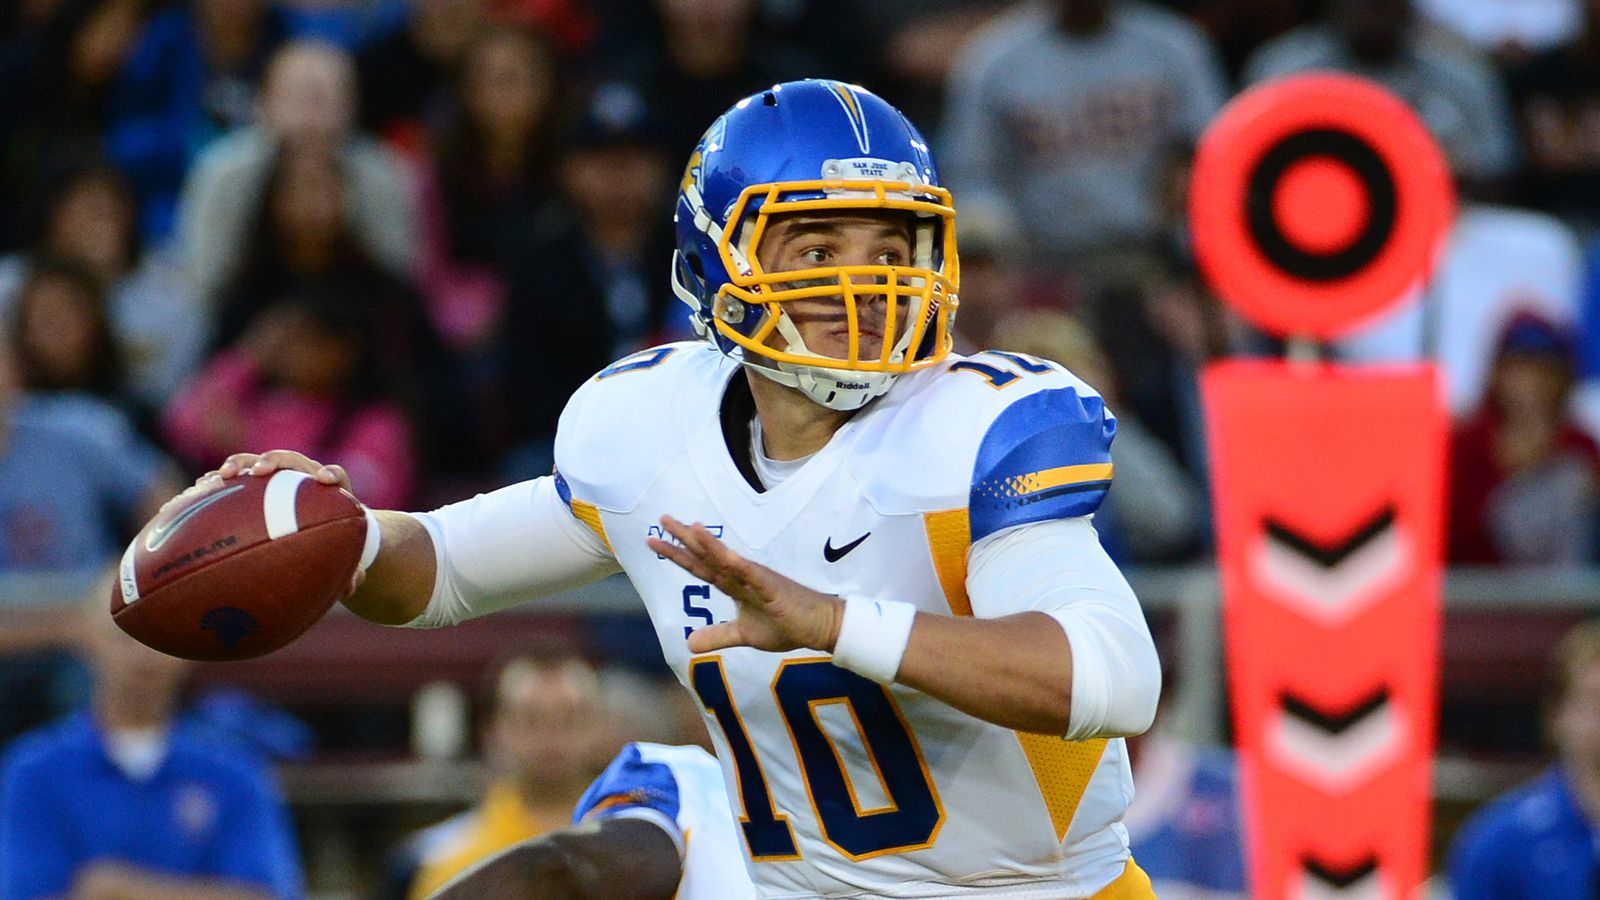 San Jose State vs. Navy football preview - Mountain West ...